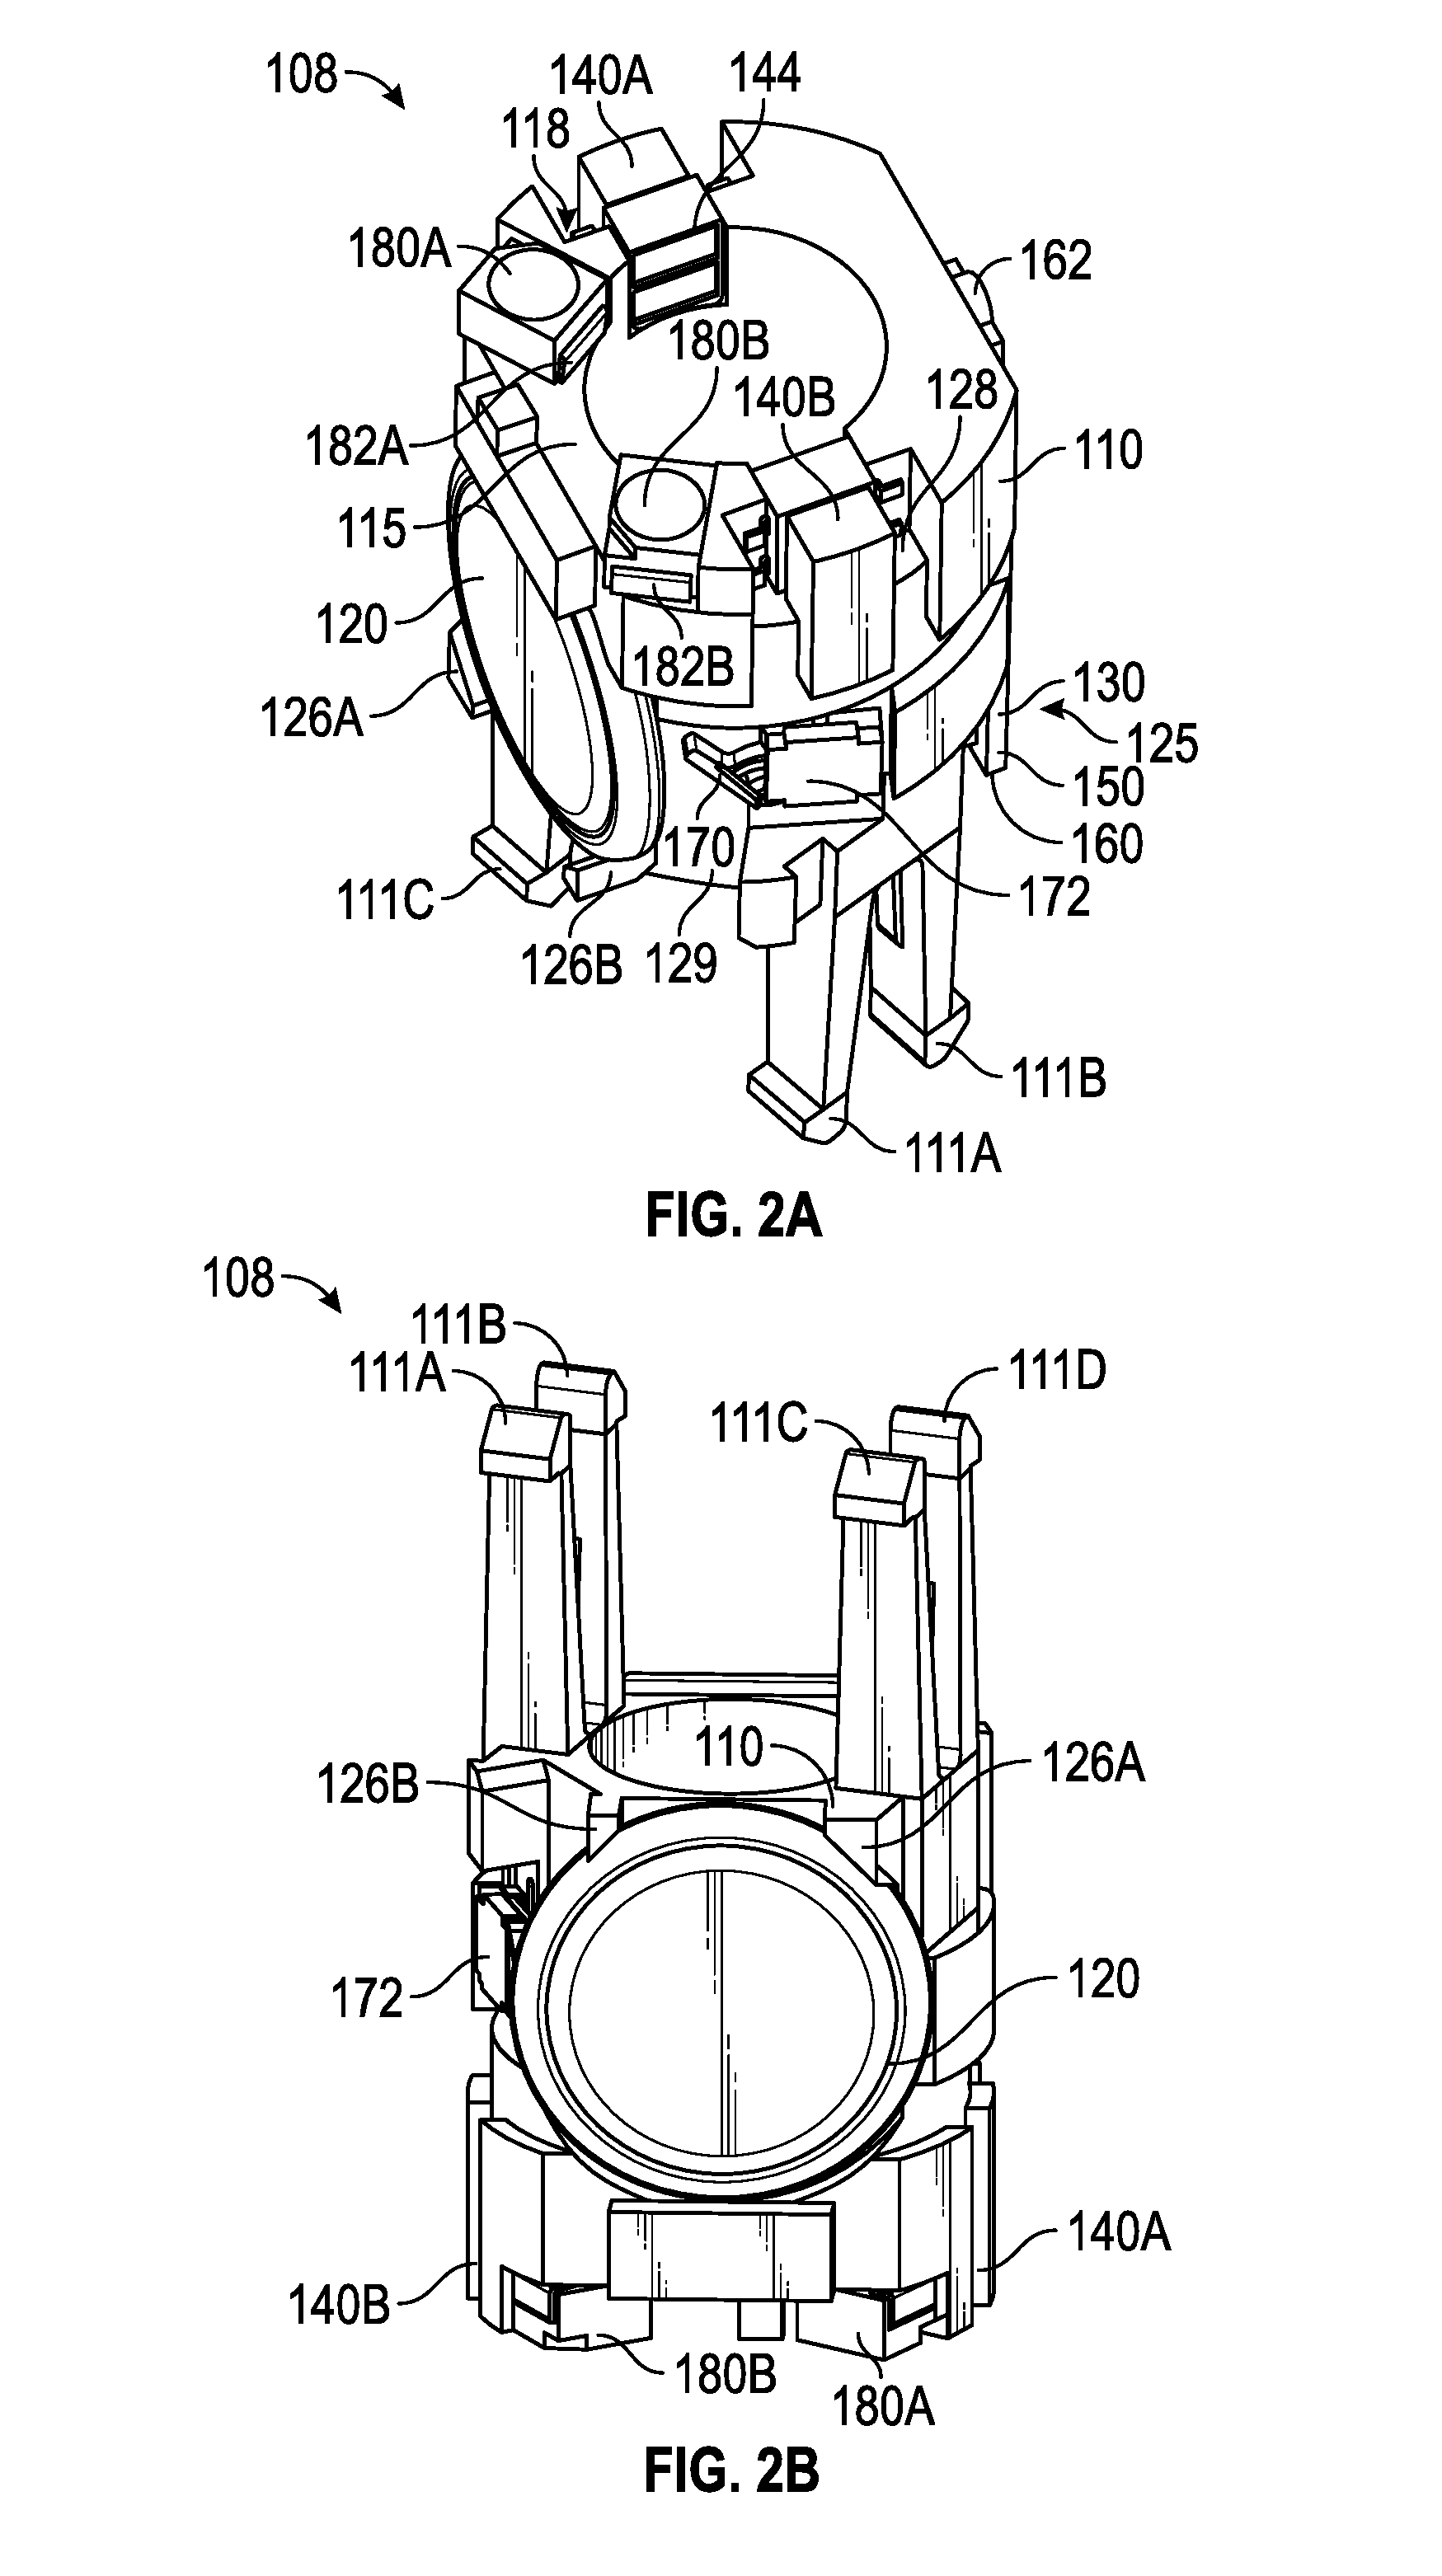 Smart module for autoinjection devices